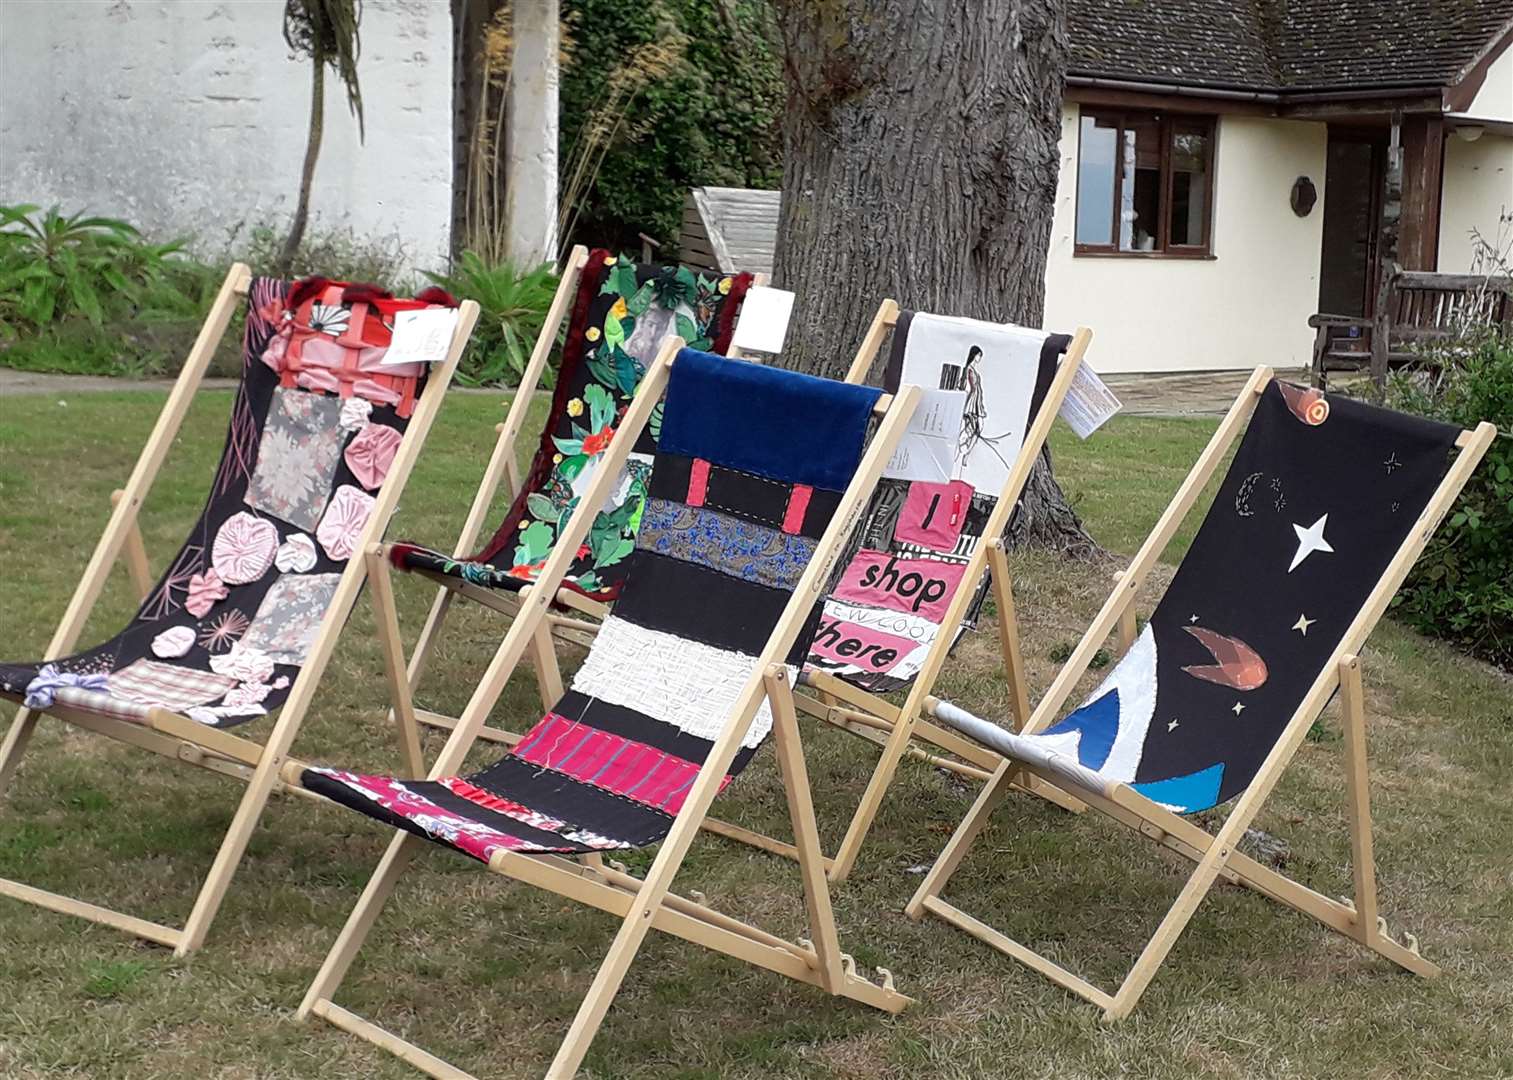 The deckchairs on display at St Margaret's. Picture: East Kent Schools Together